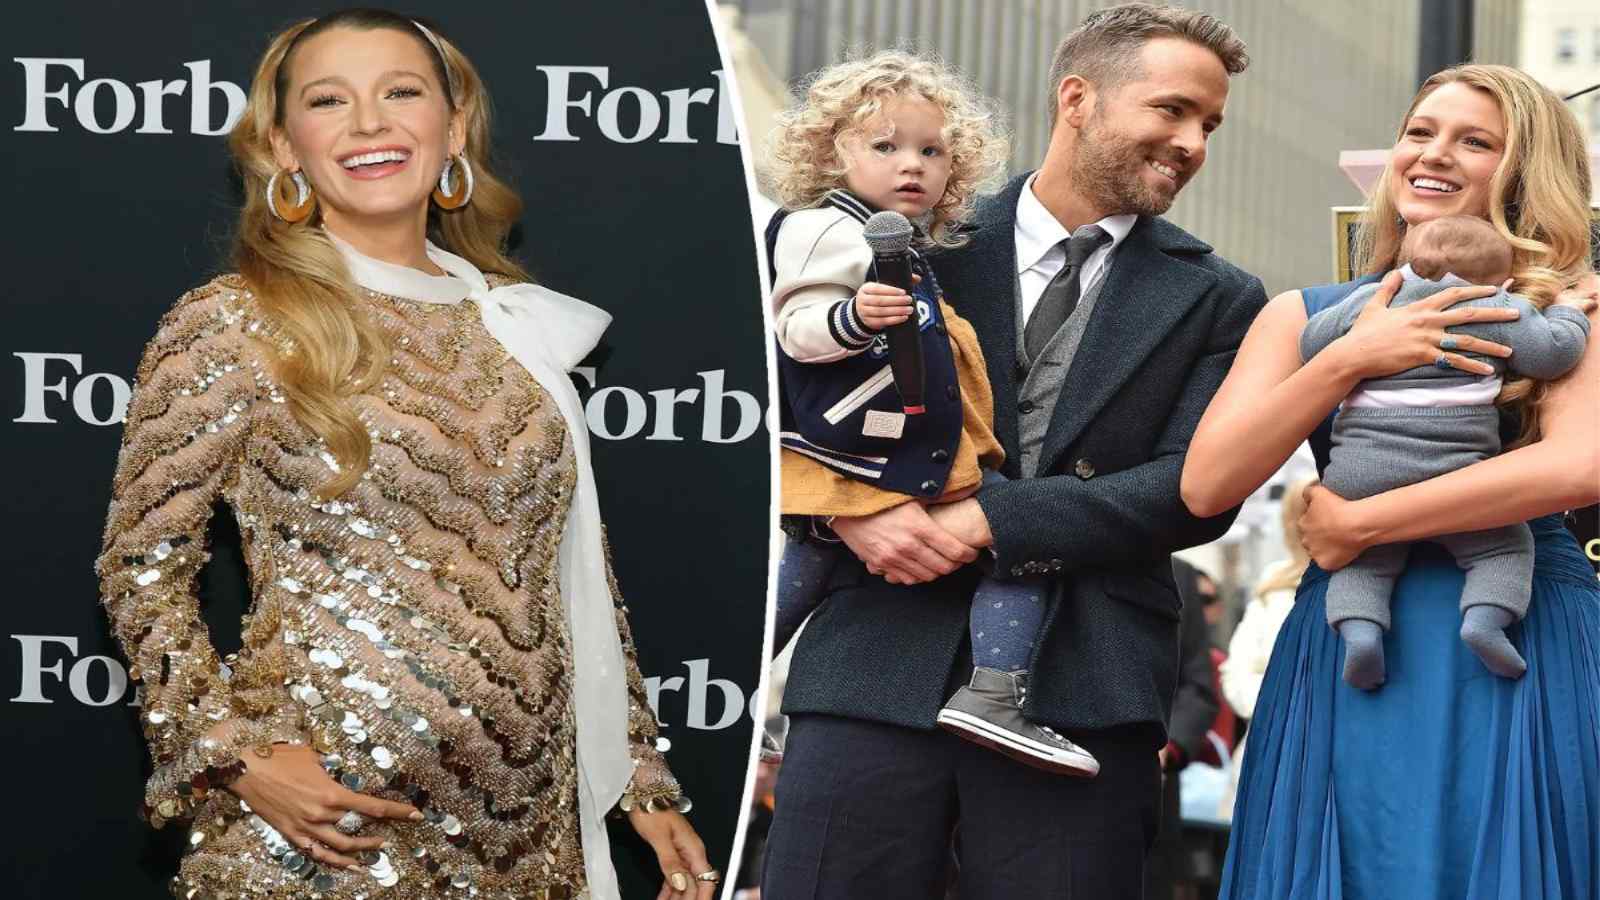 Blake Lively Gives Birth to Baby No. 4: Ryan Reynolds Shares Update